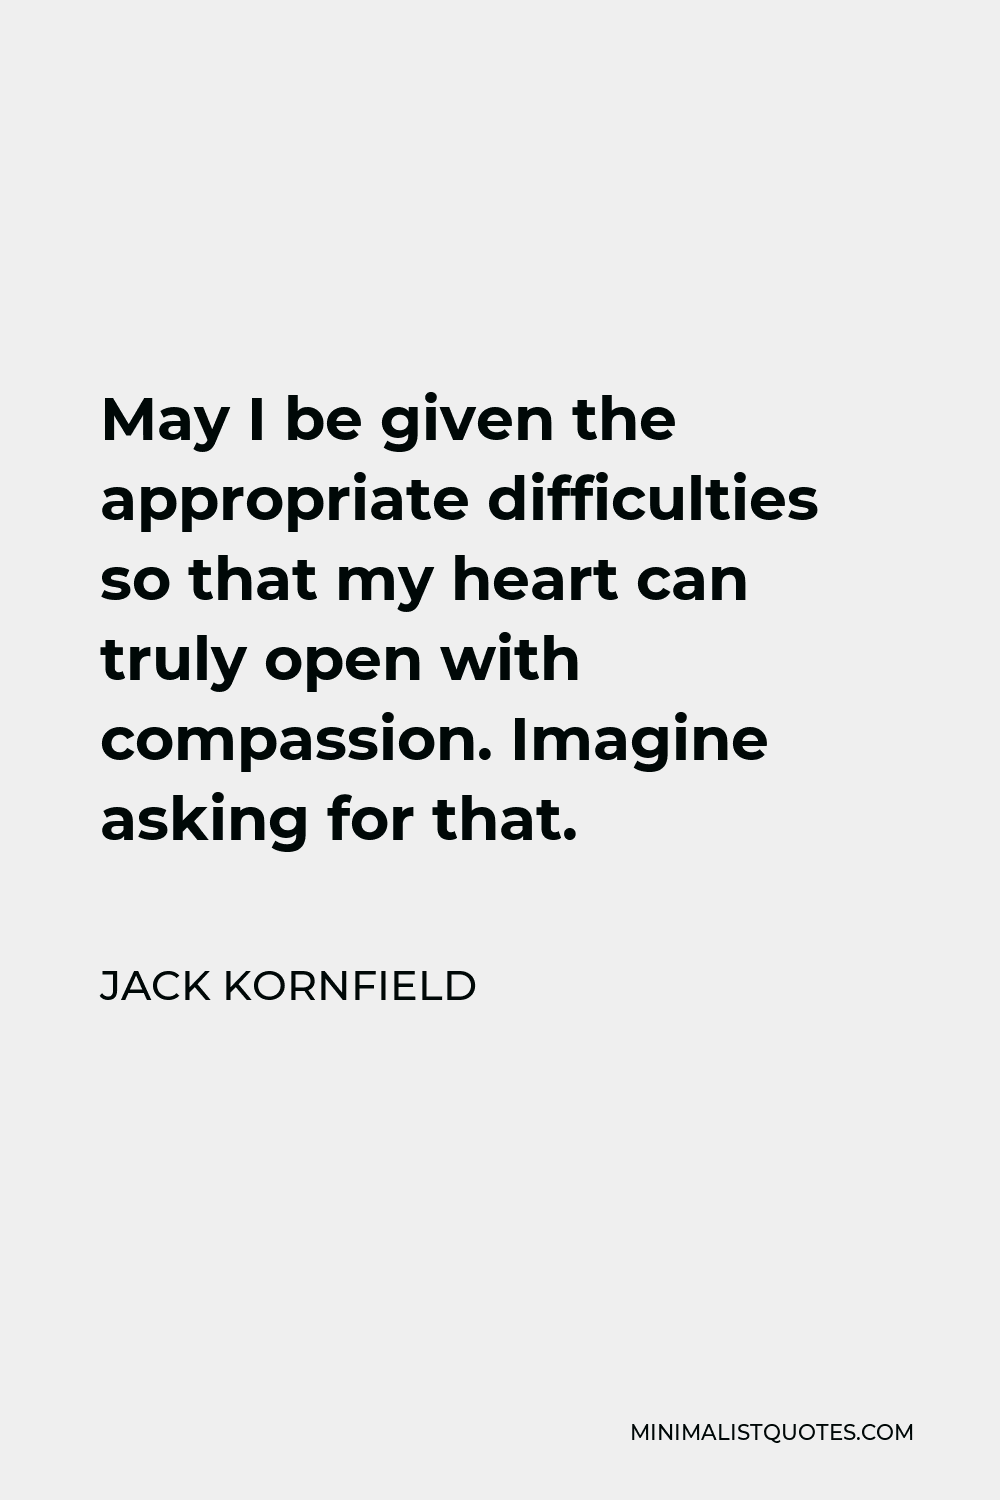 Jack Kornfield Quote - May I be given the appropriate difficulties so that my heart can truly open with compassion. Imagine asking for that.